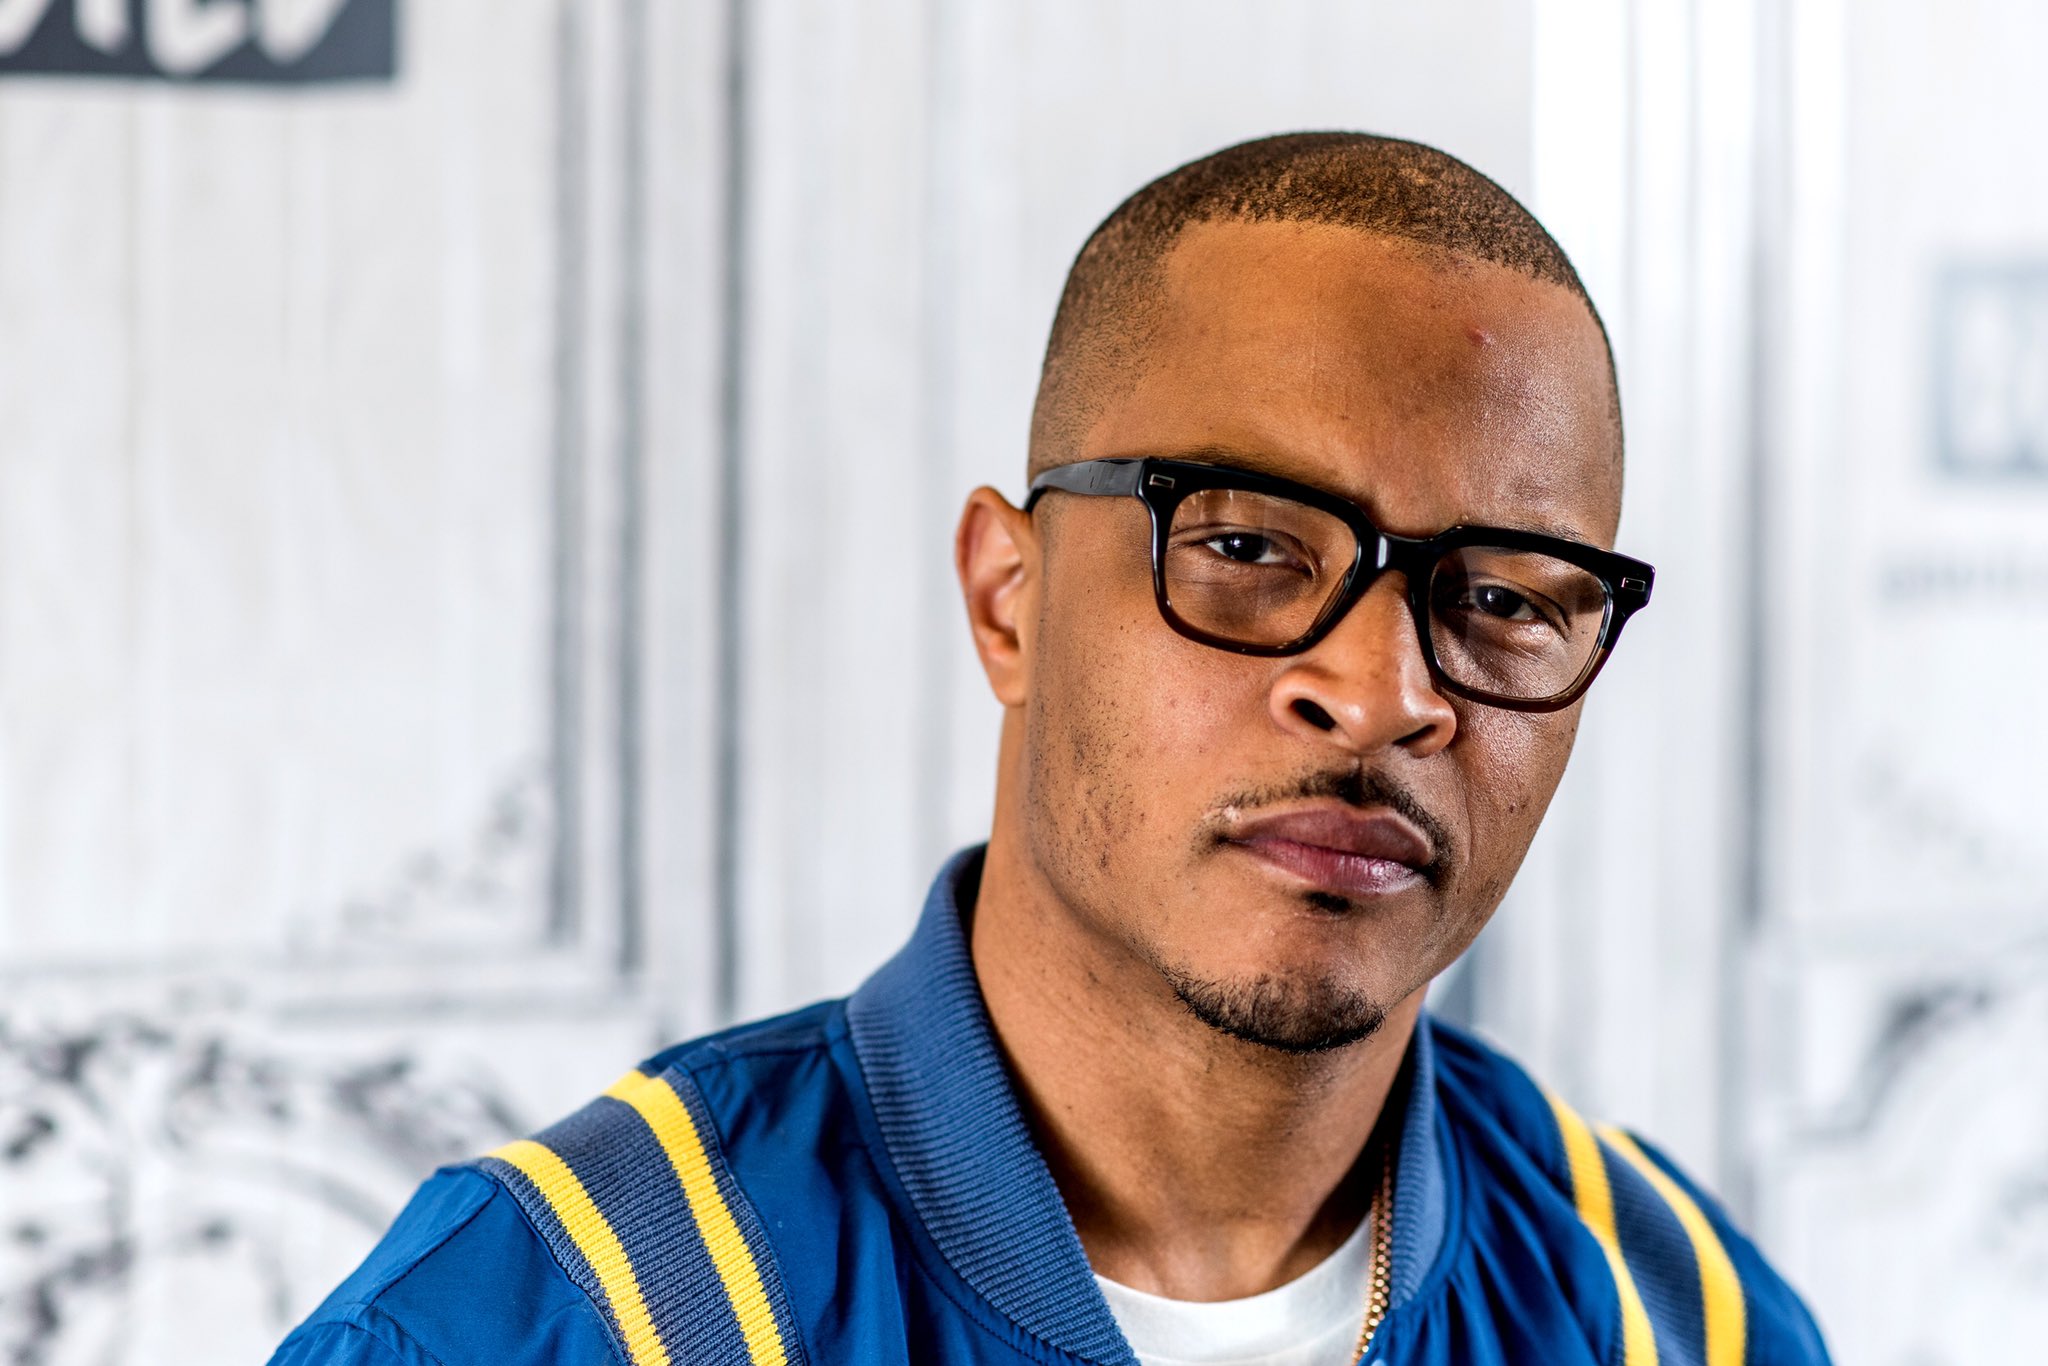 B R O T A K U On Twitter I Know I Ve Only Gotten 20 Hours Of Sleep This Week But Have Y All Ever Noticed How Shaun King Looks Like If The Rapper T I Animorphed Into A Big - theplayerender on twitter yay now roblox studio stops